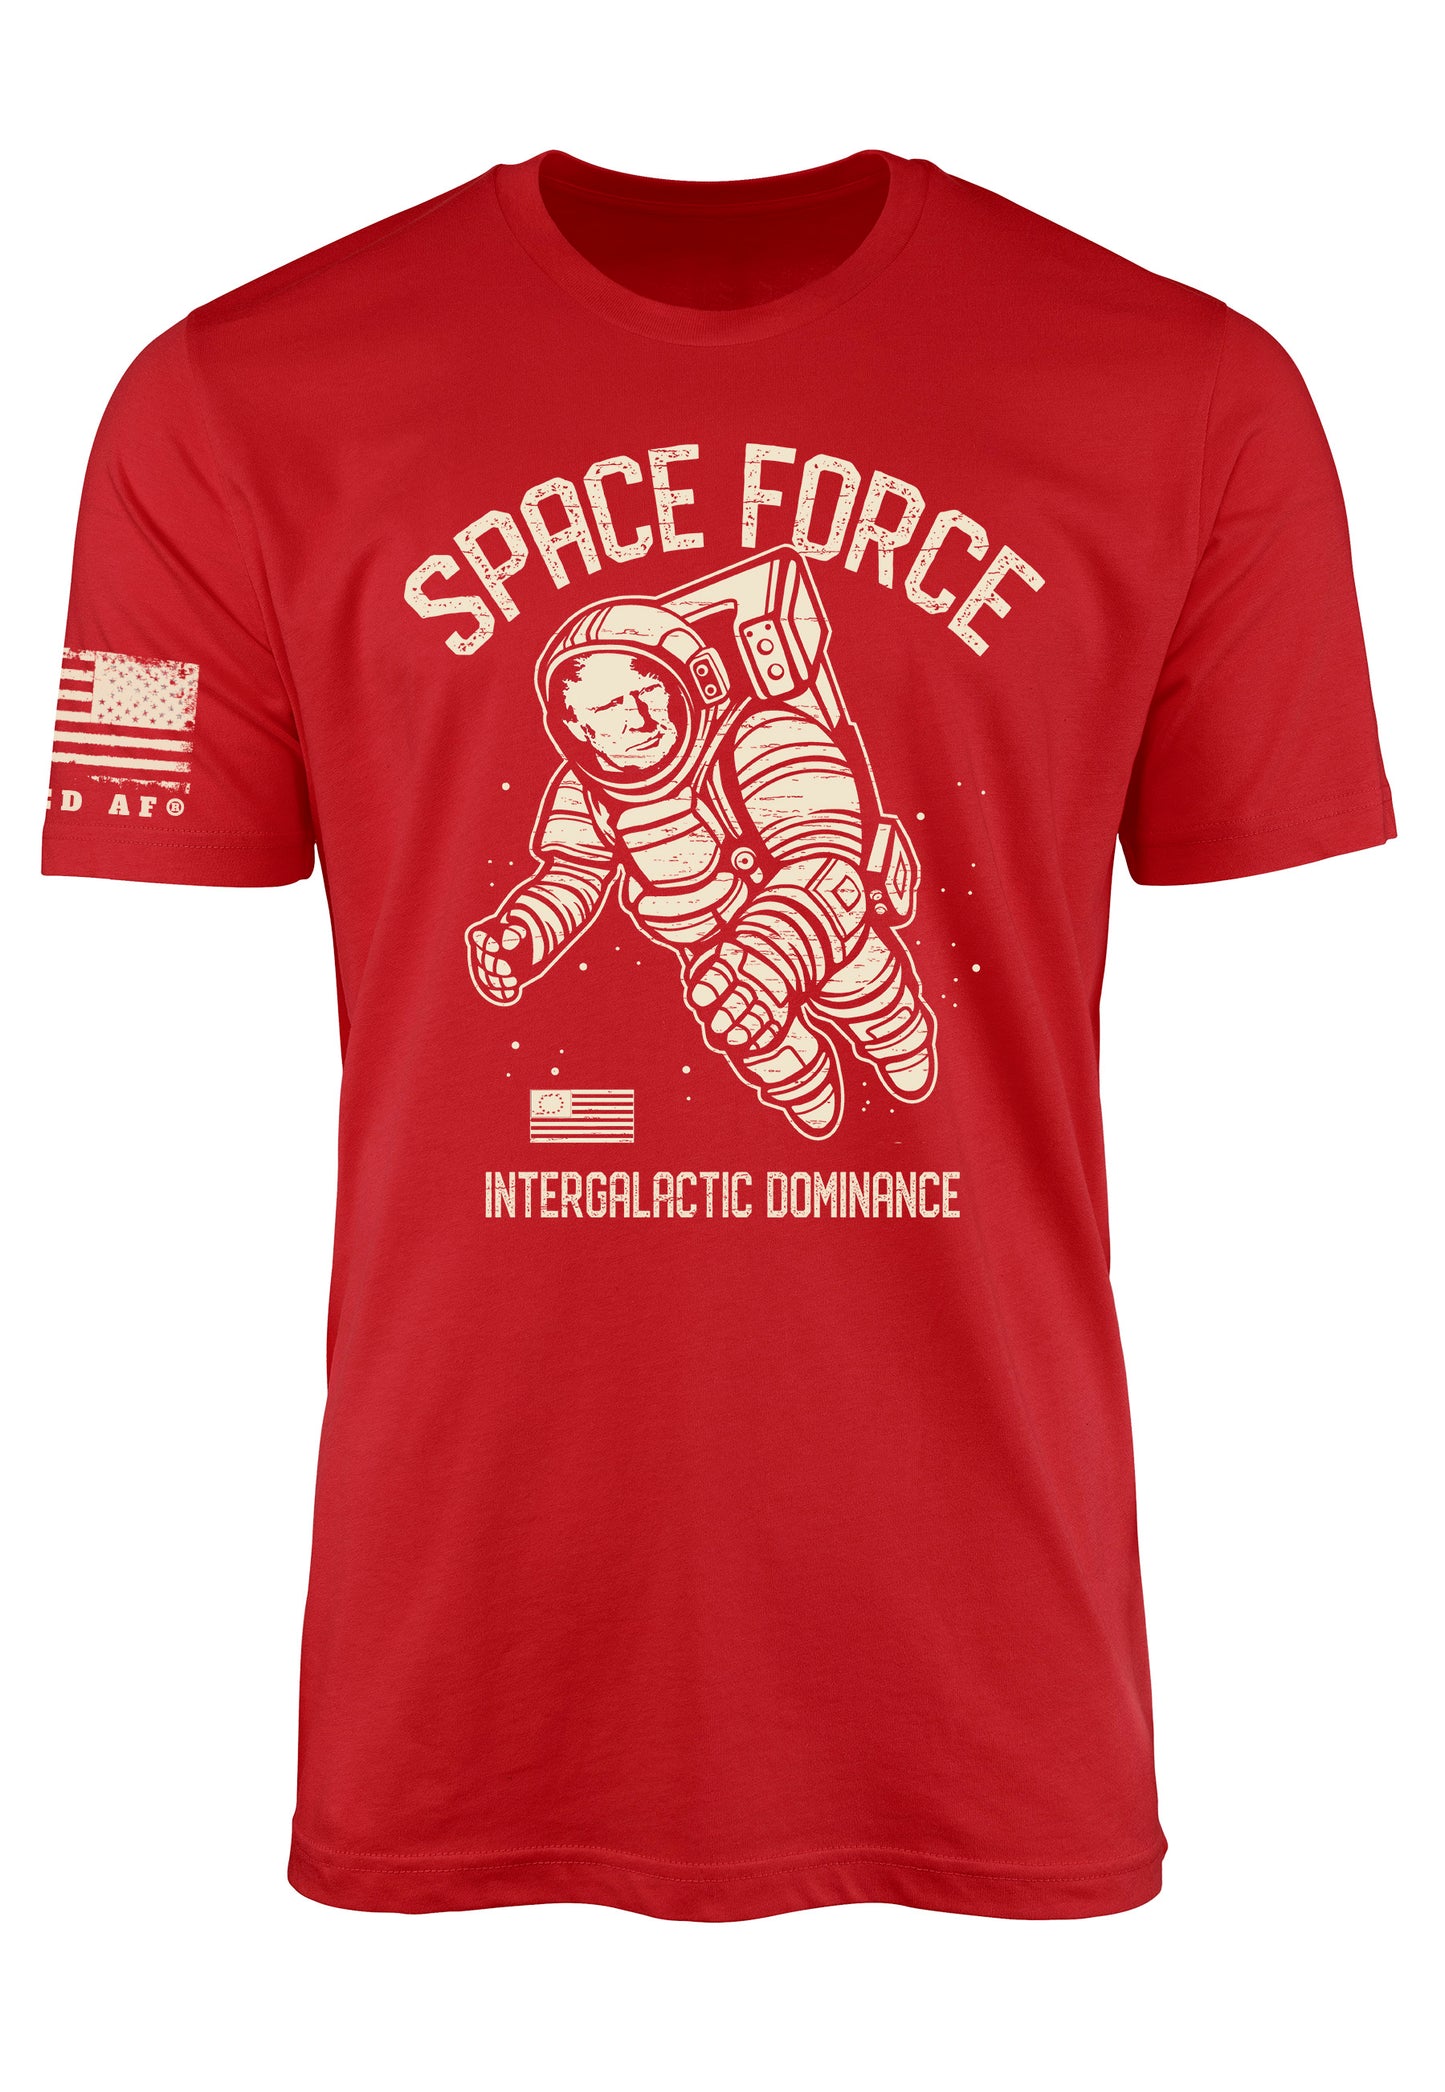 space force t-shirt on armed af tee